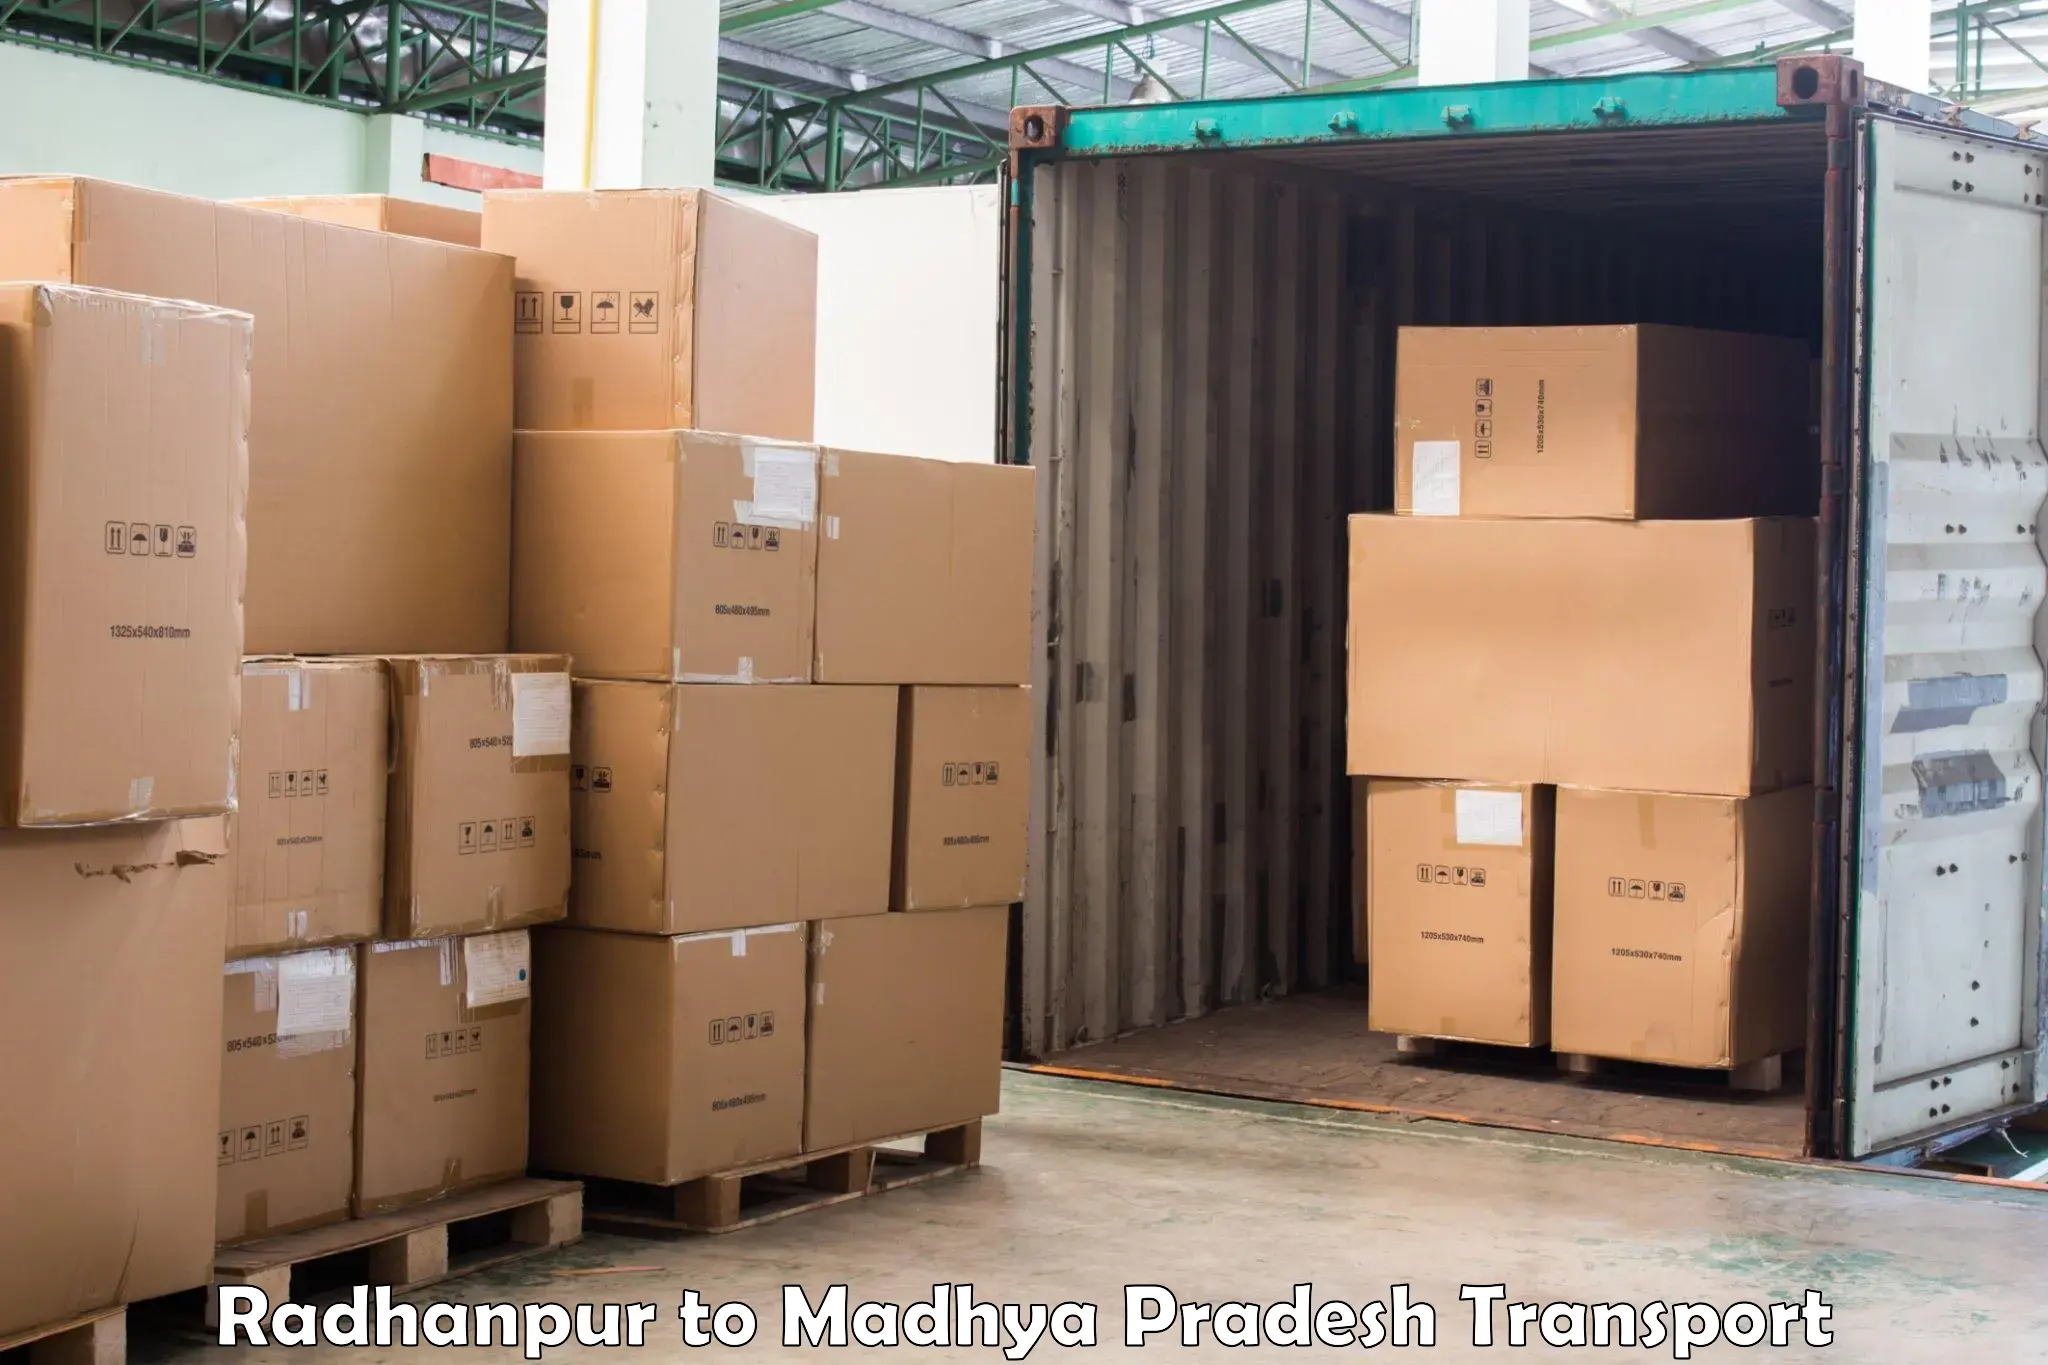 Express transport services in Radhanpur to Prithvipur